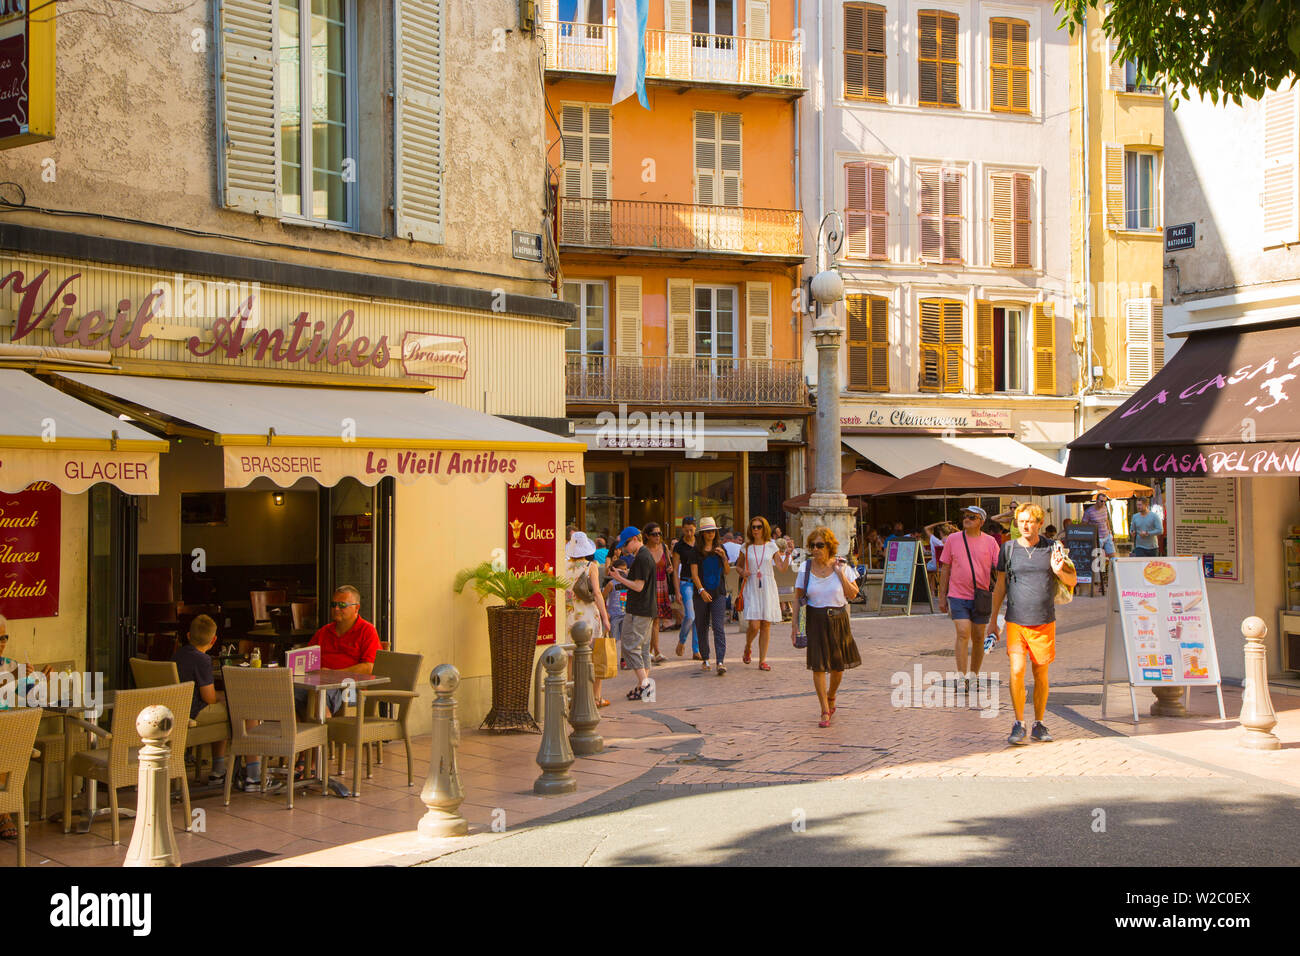 Place Nationale, Old town of Antibes, Alpes-Maritimes, Provence-Alpes-Cote D'Azur, French Riviera, France Stock Photo